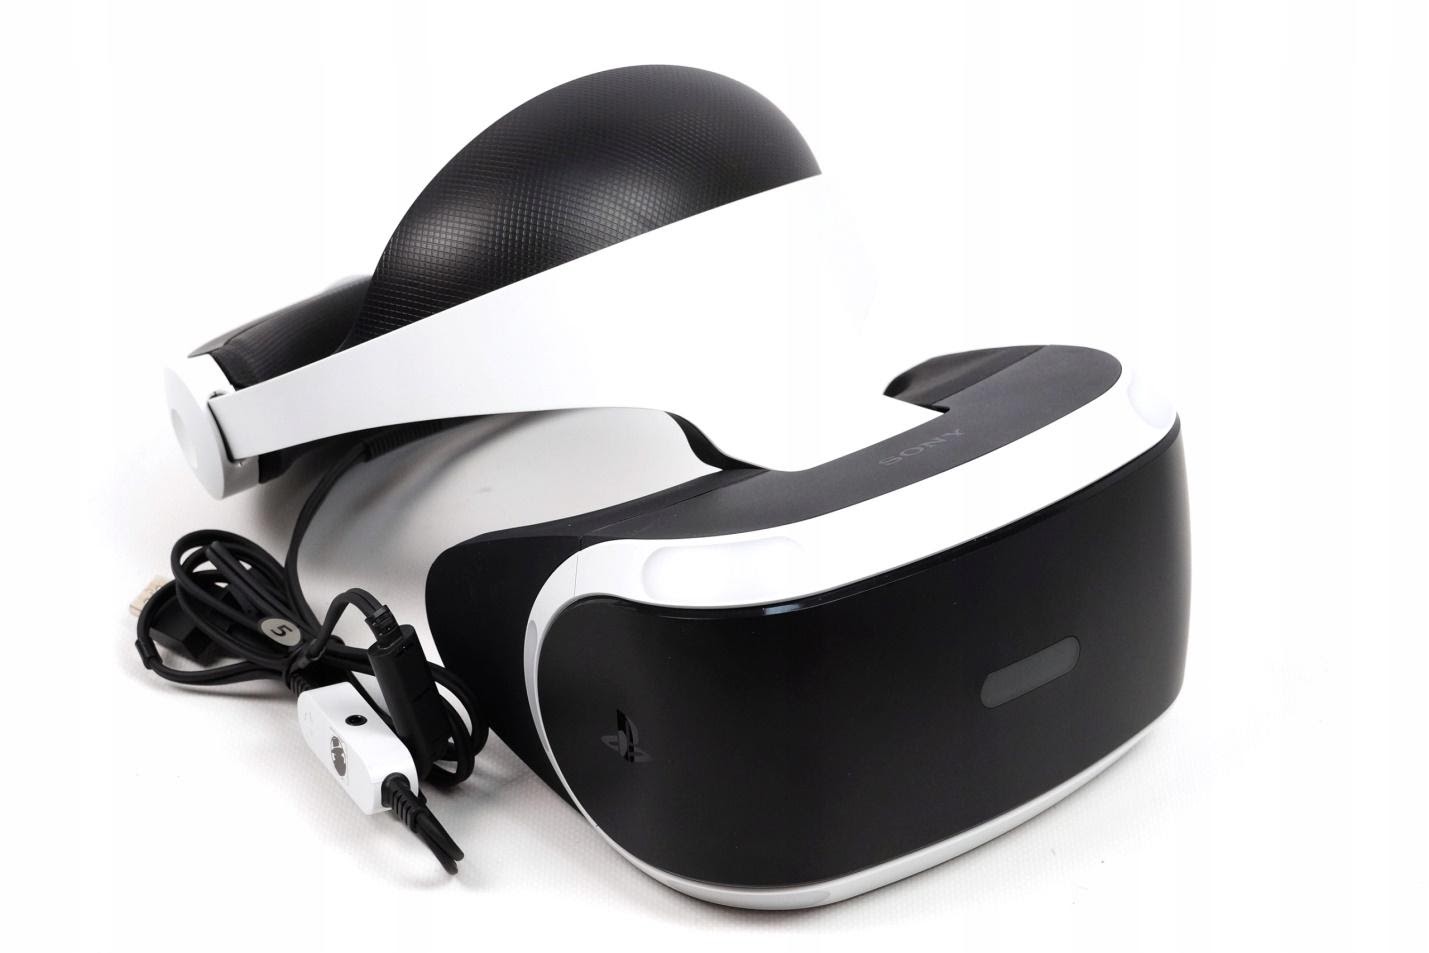 Virtual Reality Headset for Sony PlayStation VR (CUH-ZVR2)